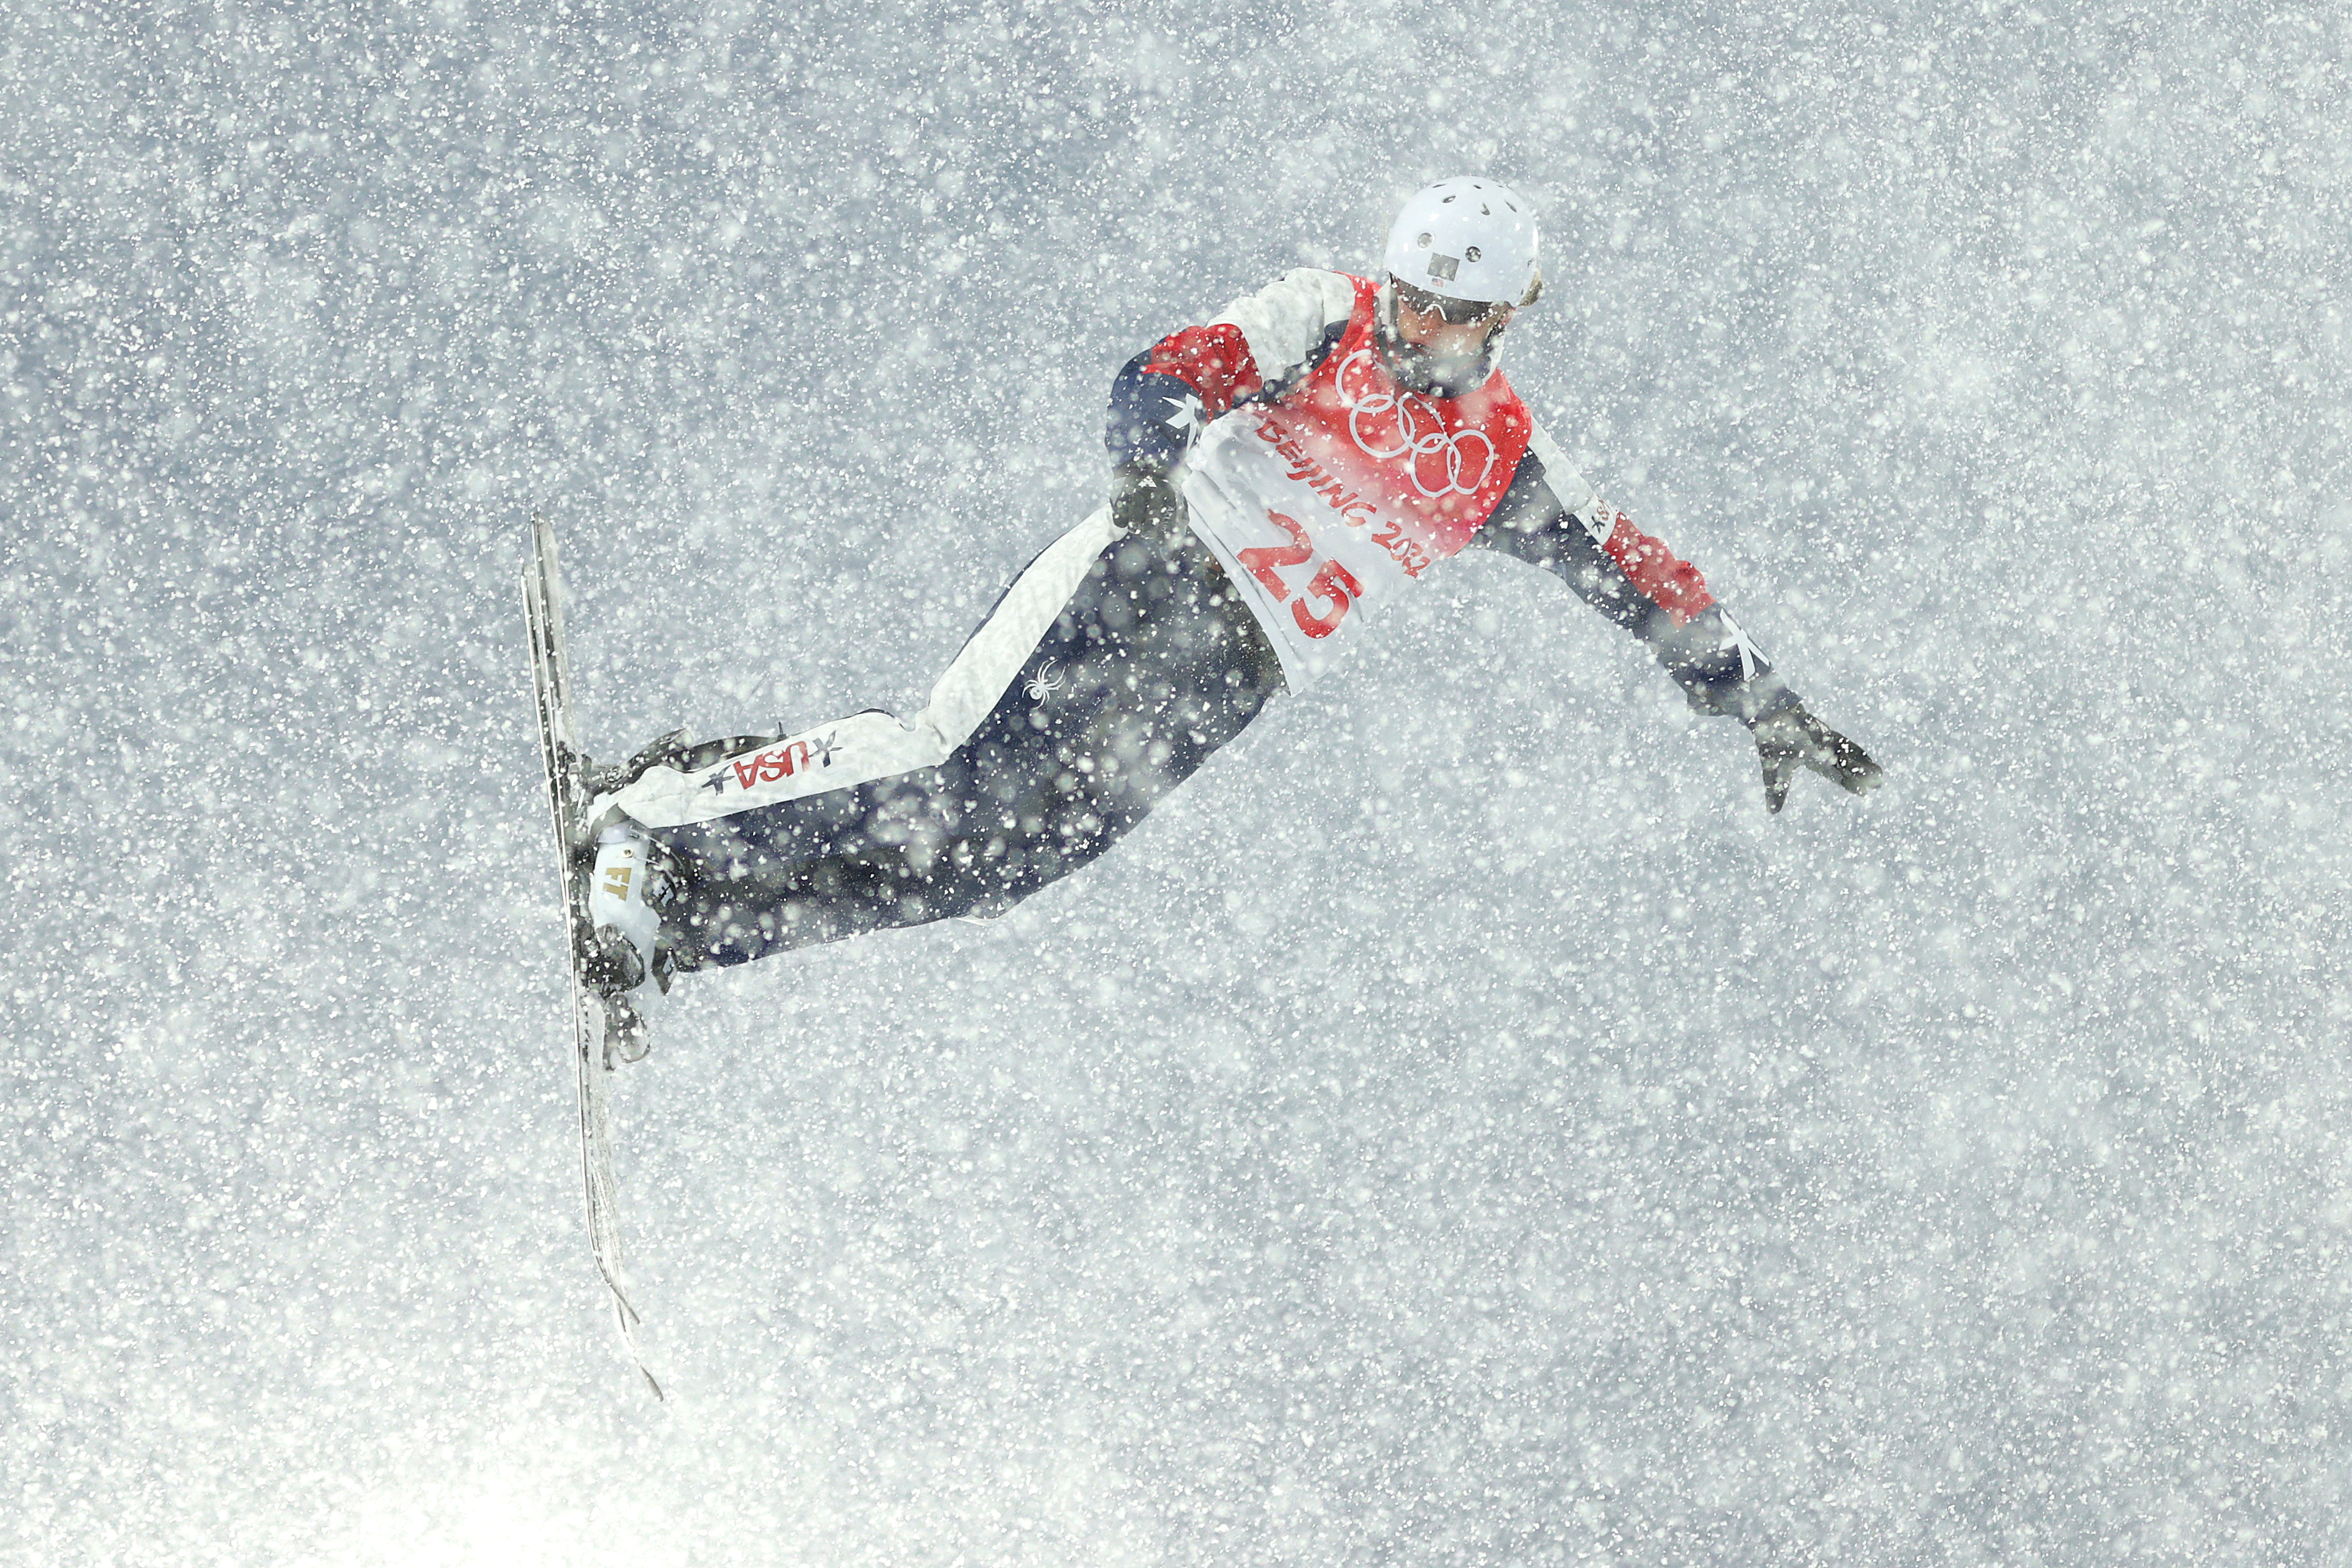 Megan Nick of Team United States performs a trick on a practice run ahead of the Women’s Freestyle Skiing Aerials Qualification on Day 9 of the Beijing 2022 Winter Olympics at Genting Snow Park on February 13, 2022 in Zhangjiakou, China.